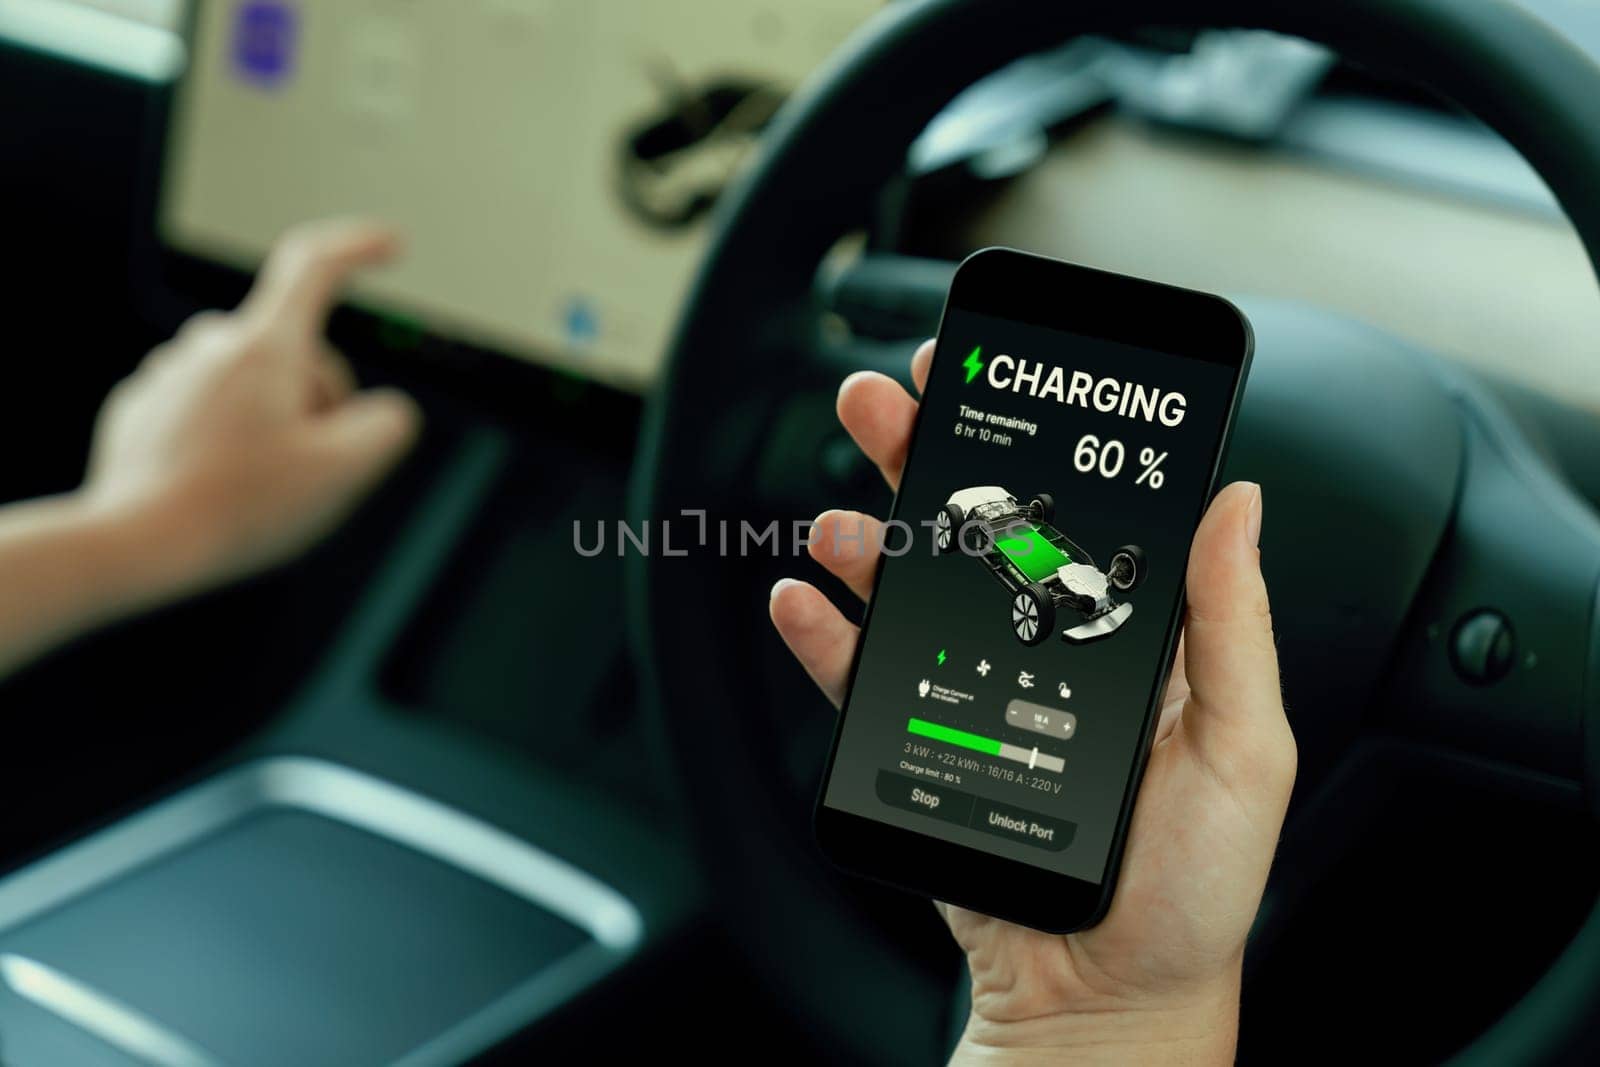 Holiday vacation road trip with environmental-friendly car concept. Eco-conscious woman on driver seat checking EV car's battery status display on smartphone during car travel. Perpetual